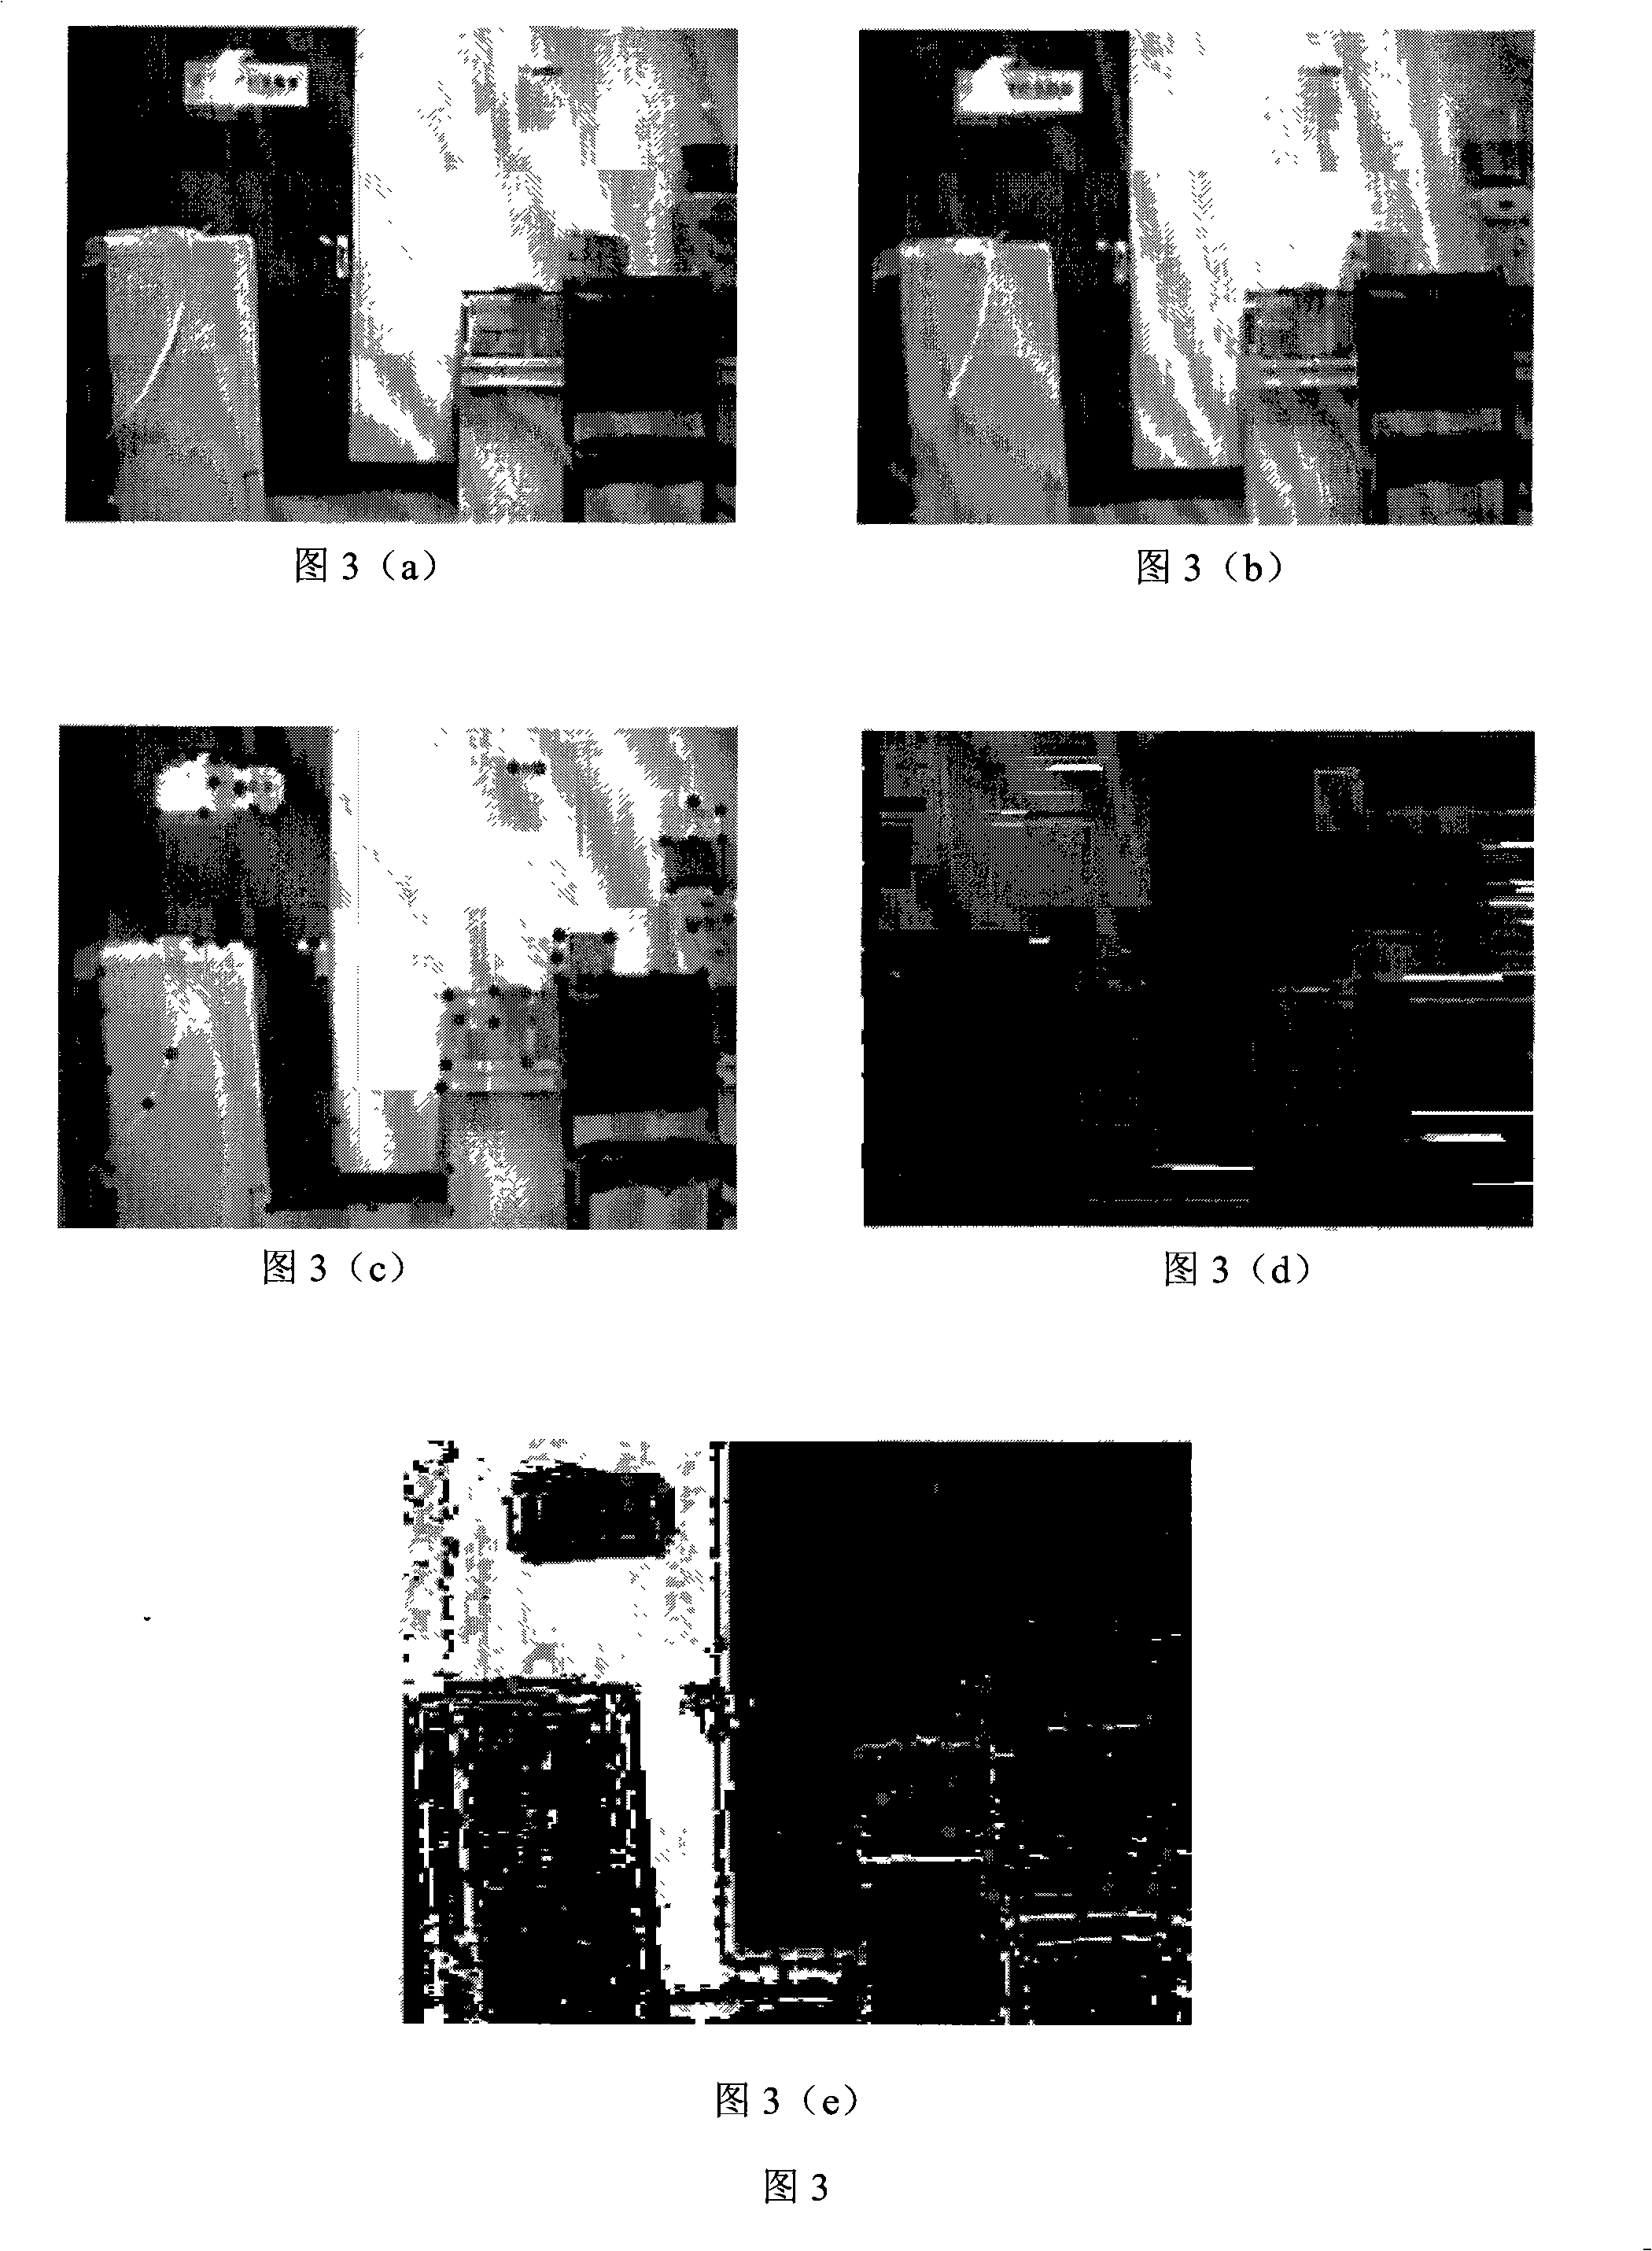 Information acquisition and transfer method of auxiliary vision system